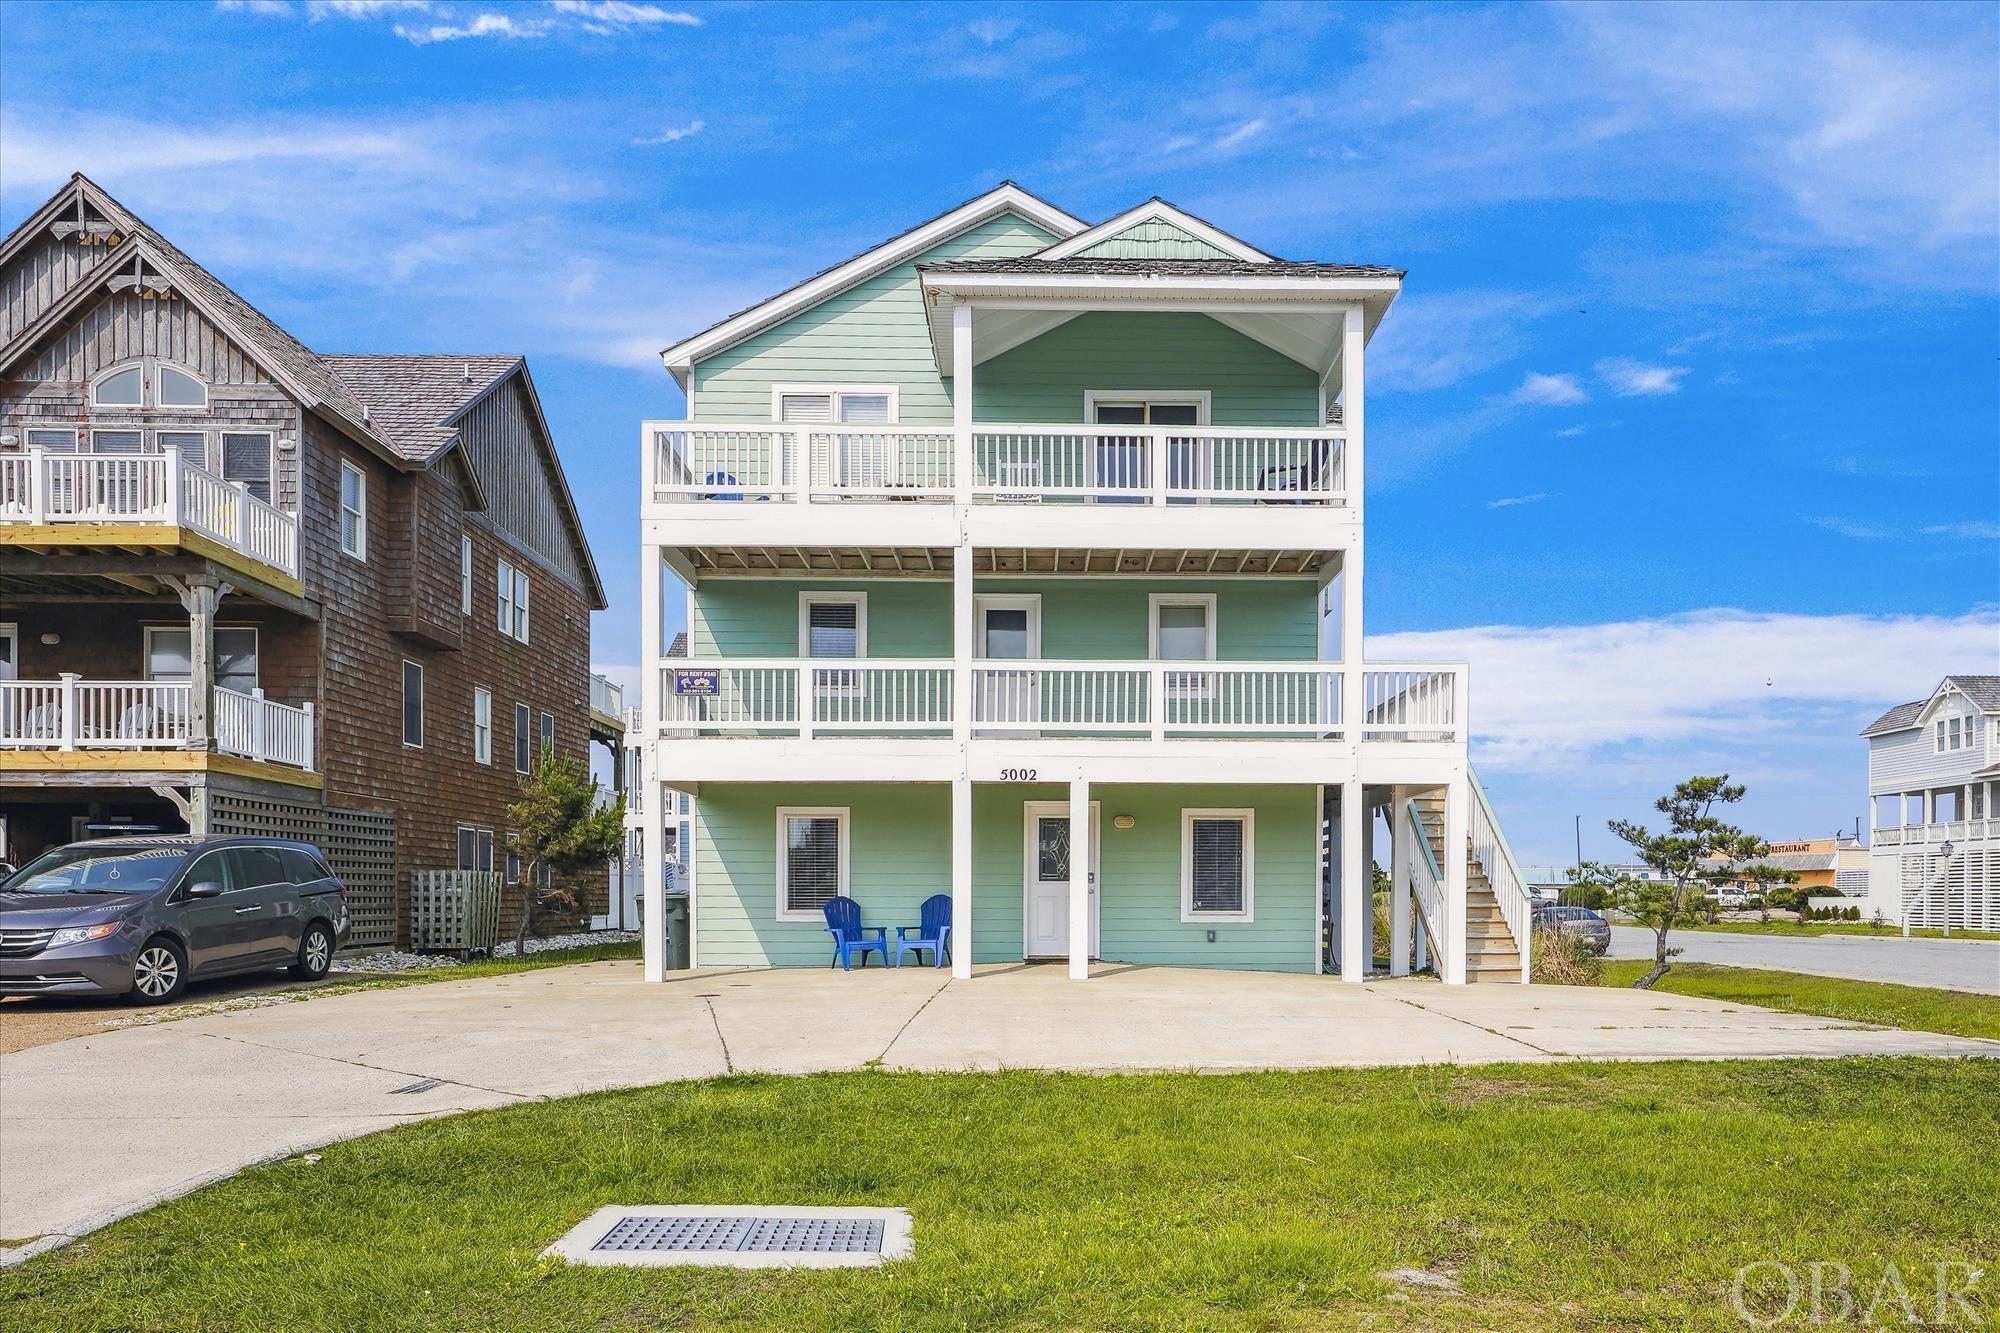 Beautiful 7 bedroom, five and 1/2 bath semi-oceanfront home located on a corner lot at E. Mall Dr. and the Beach Road in the Village of Nags Head.  Has all the amenities such as an elevator, pool, hot tub, game room, and lots of decking with ocean views to make this a great rental home or your dream home.  The top level has a primary suite, four bedrooms on the mid-level and two additional bedrooms on the ground level.  Lots of improvements in 2023 - outside house painted, new furniture, new bedspreads, lamps, hardwood floors and steps refinished, all new appliances (except washer and dryer) and more.  New elevator installed in 2022.  The Village of Nags Head offers a shuttle bus, 2 Sound accesses, ocean access with parking and a bath house less than 500 feet away.